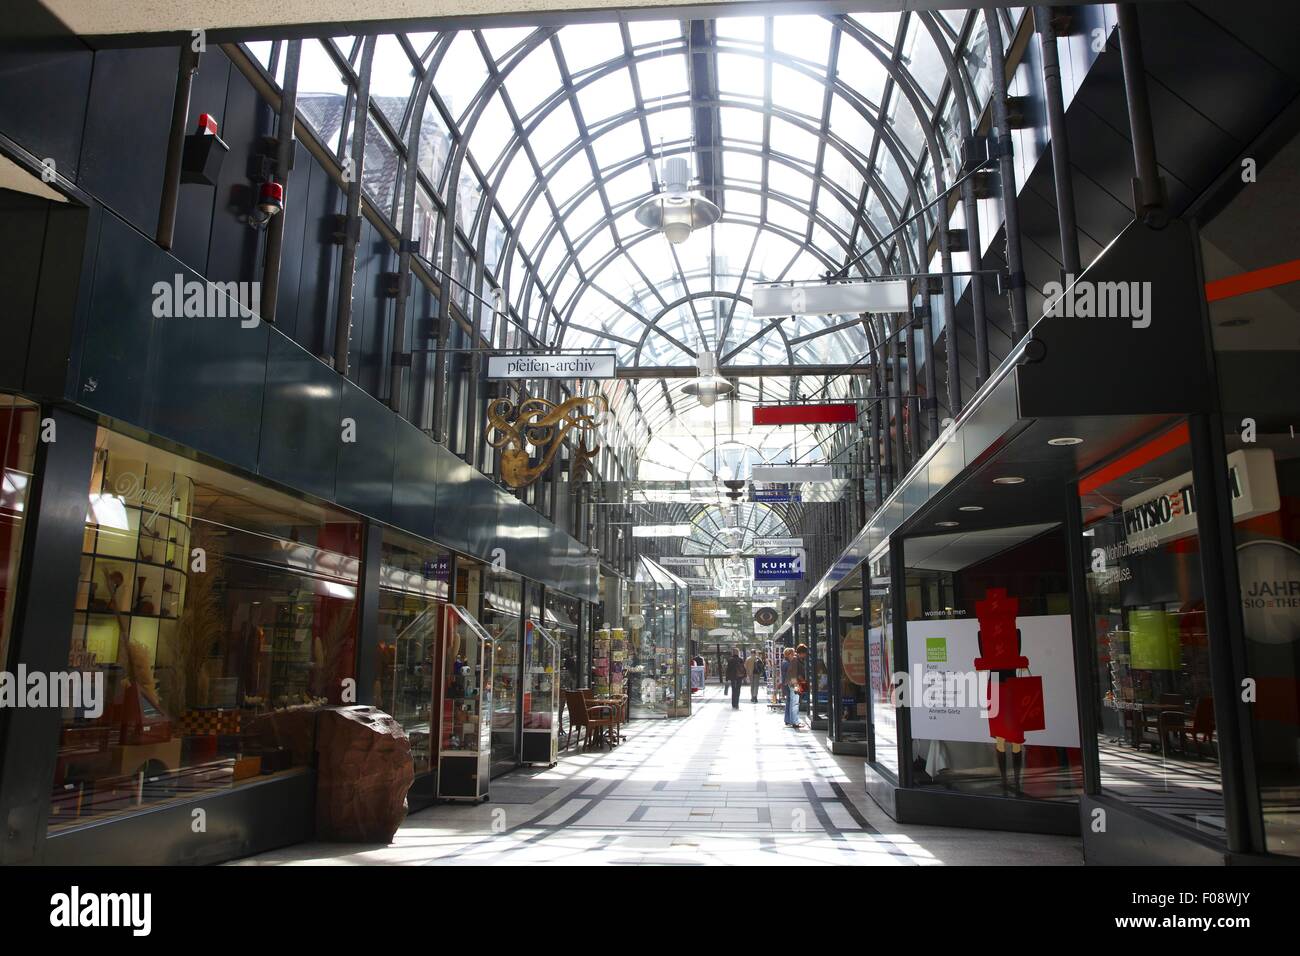 Shops in arcade at Calw, Stuttgart, Germany Stock Photo